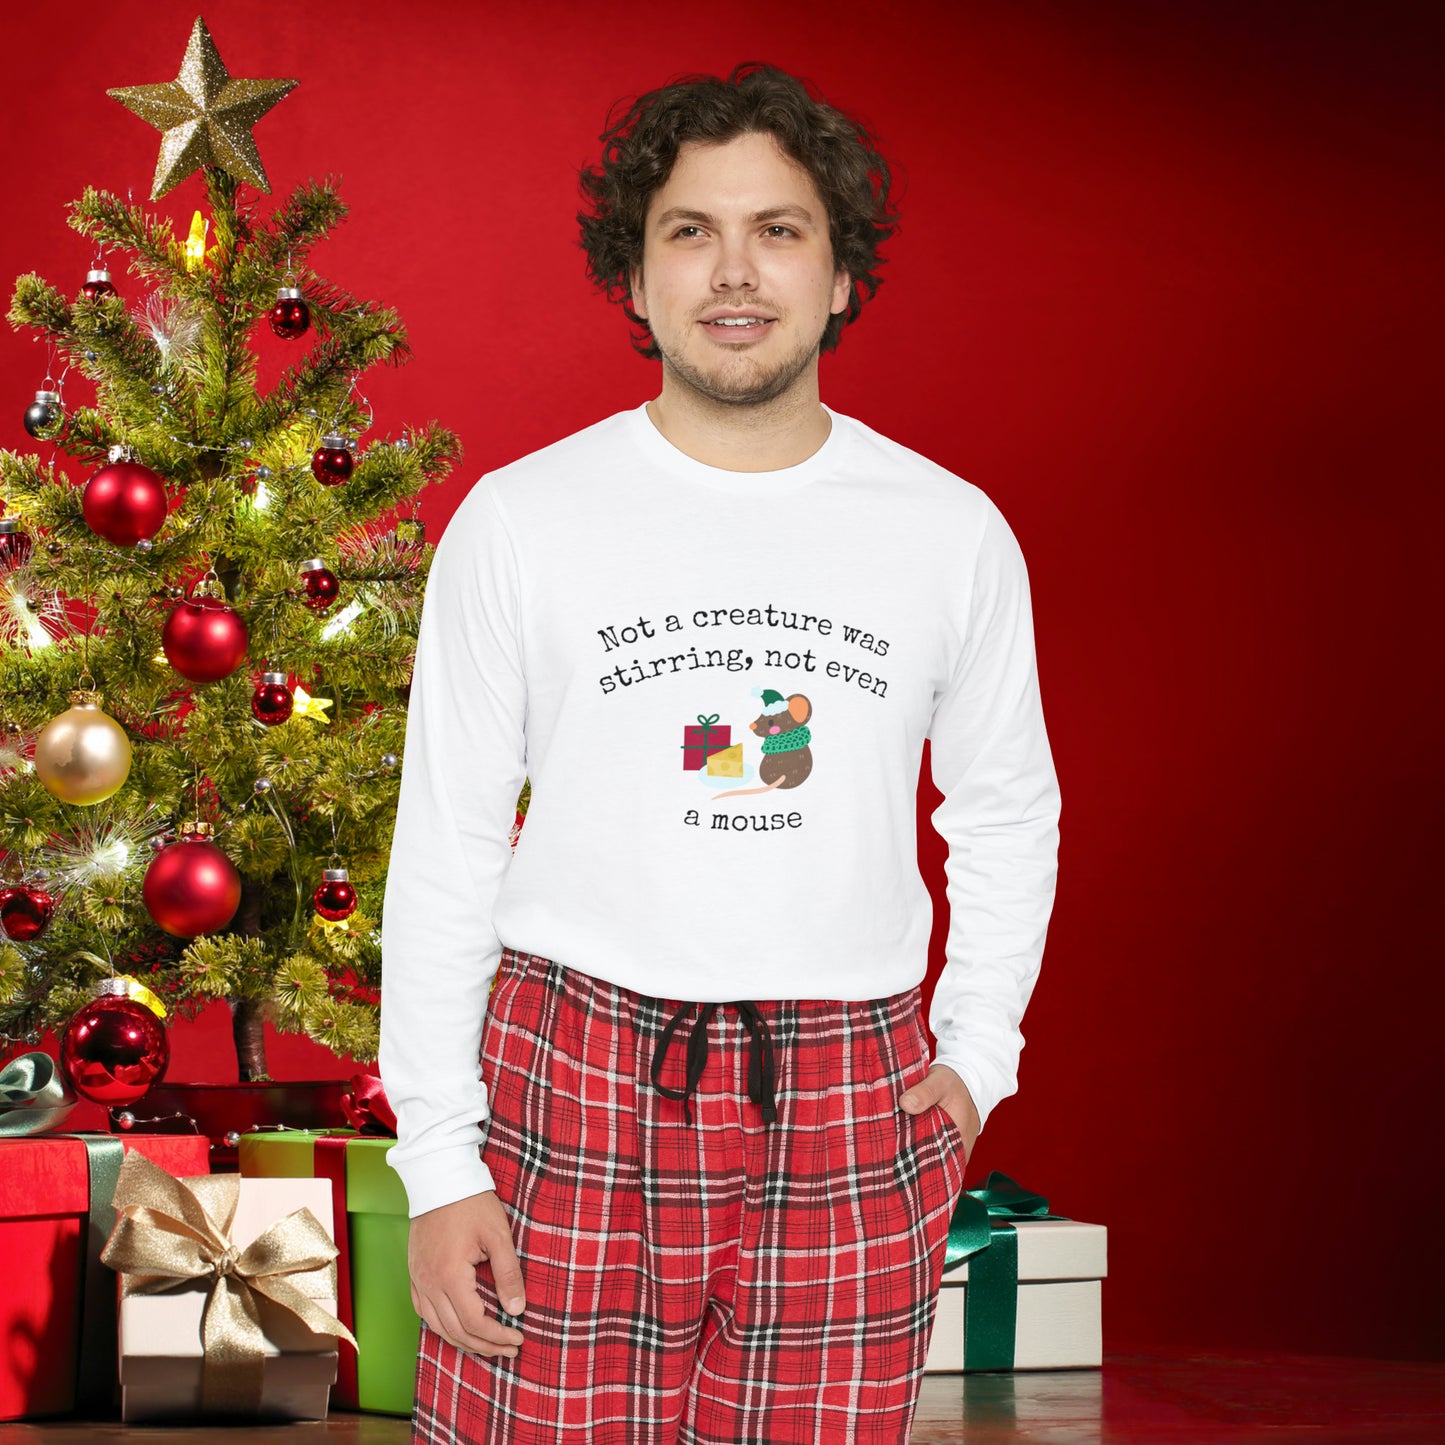 Men's Long Sleeve Pajama Set, Family Christmas Matching Pajamas, "Not a creature was stirring, not even a mouse", Flannel Pants